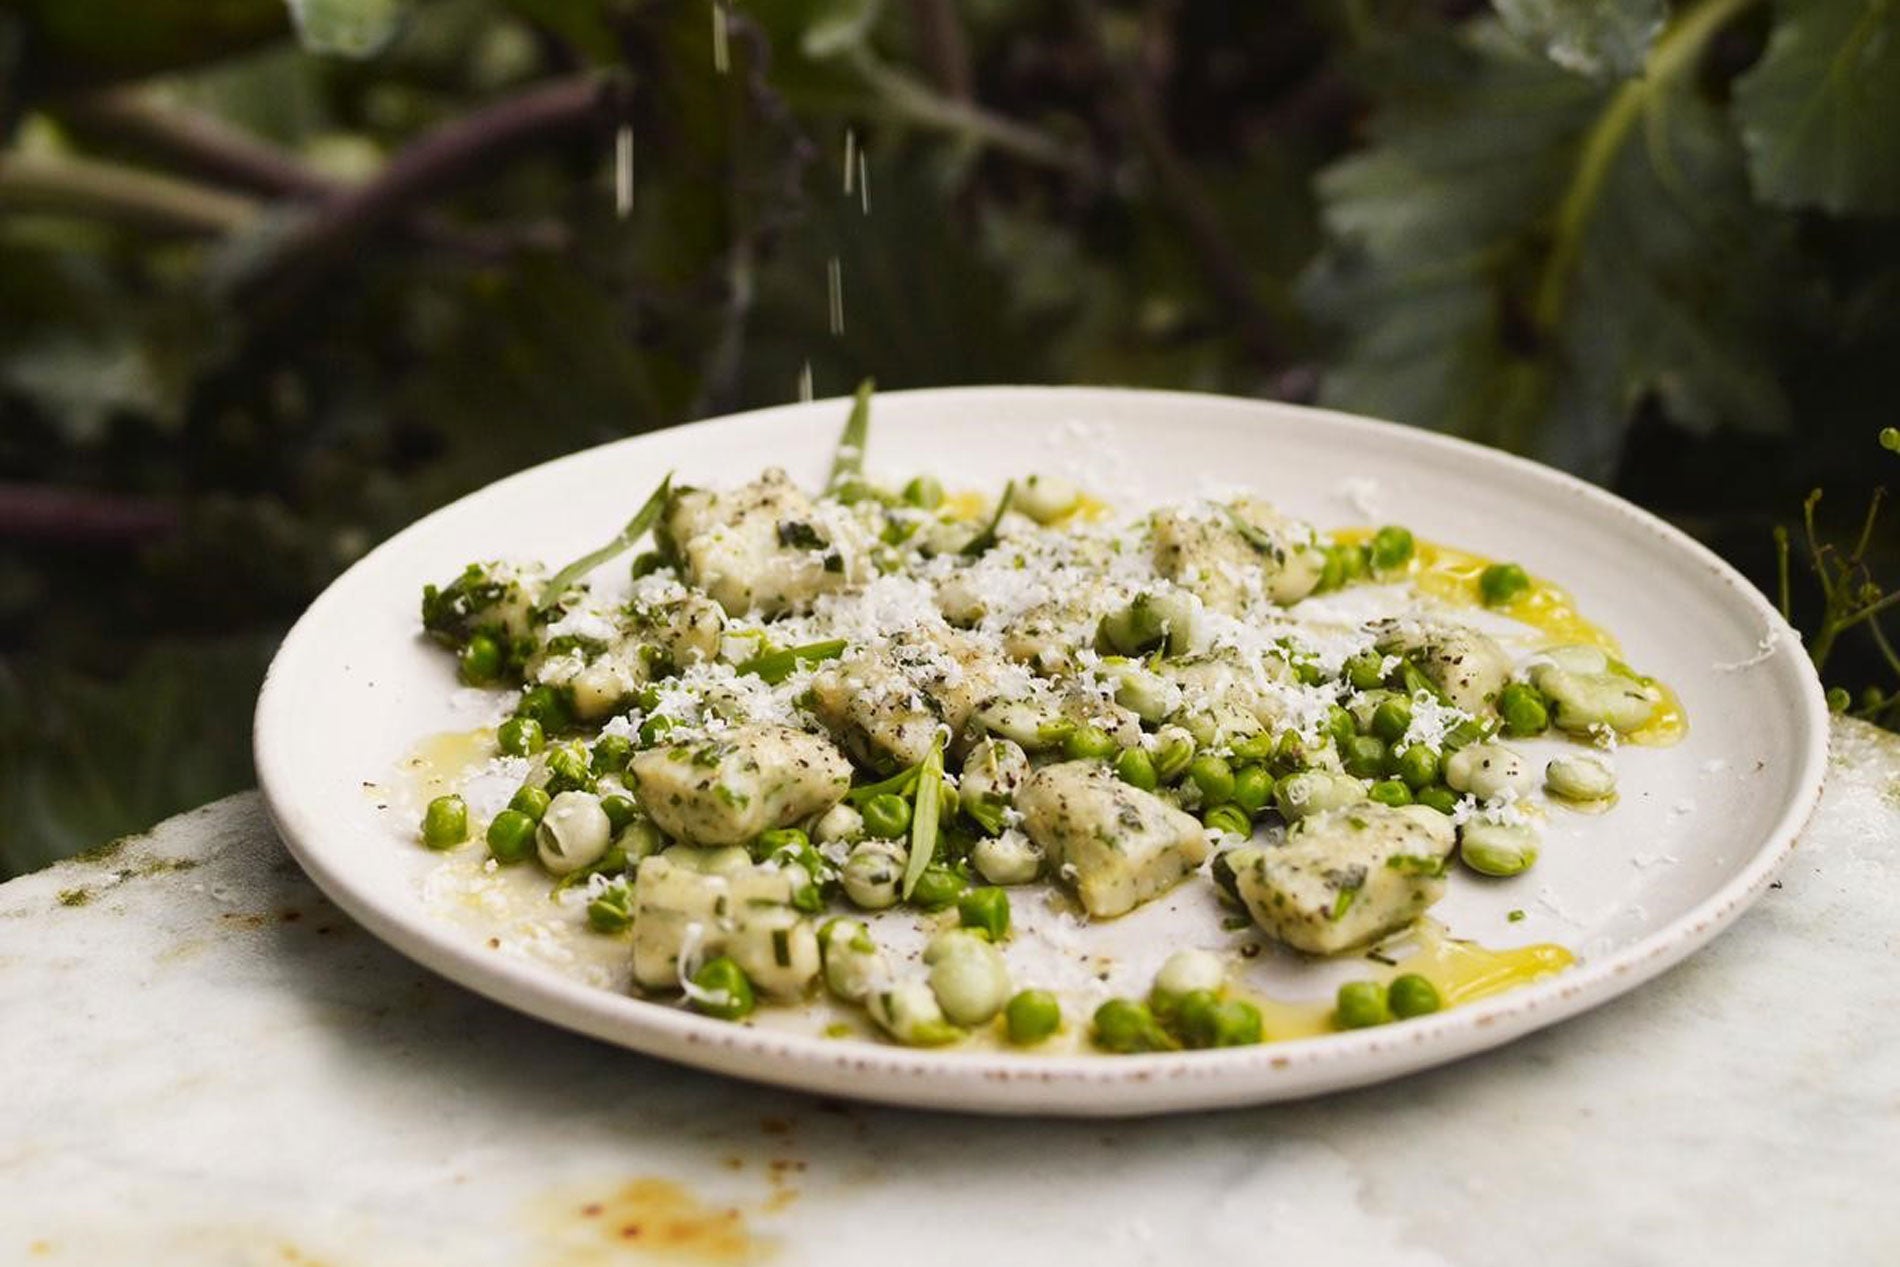 Gill Meller: Broad Beans and Peas with New Potato and Parsley Gnocchi, Chives and Tarragon